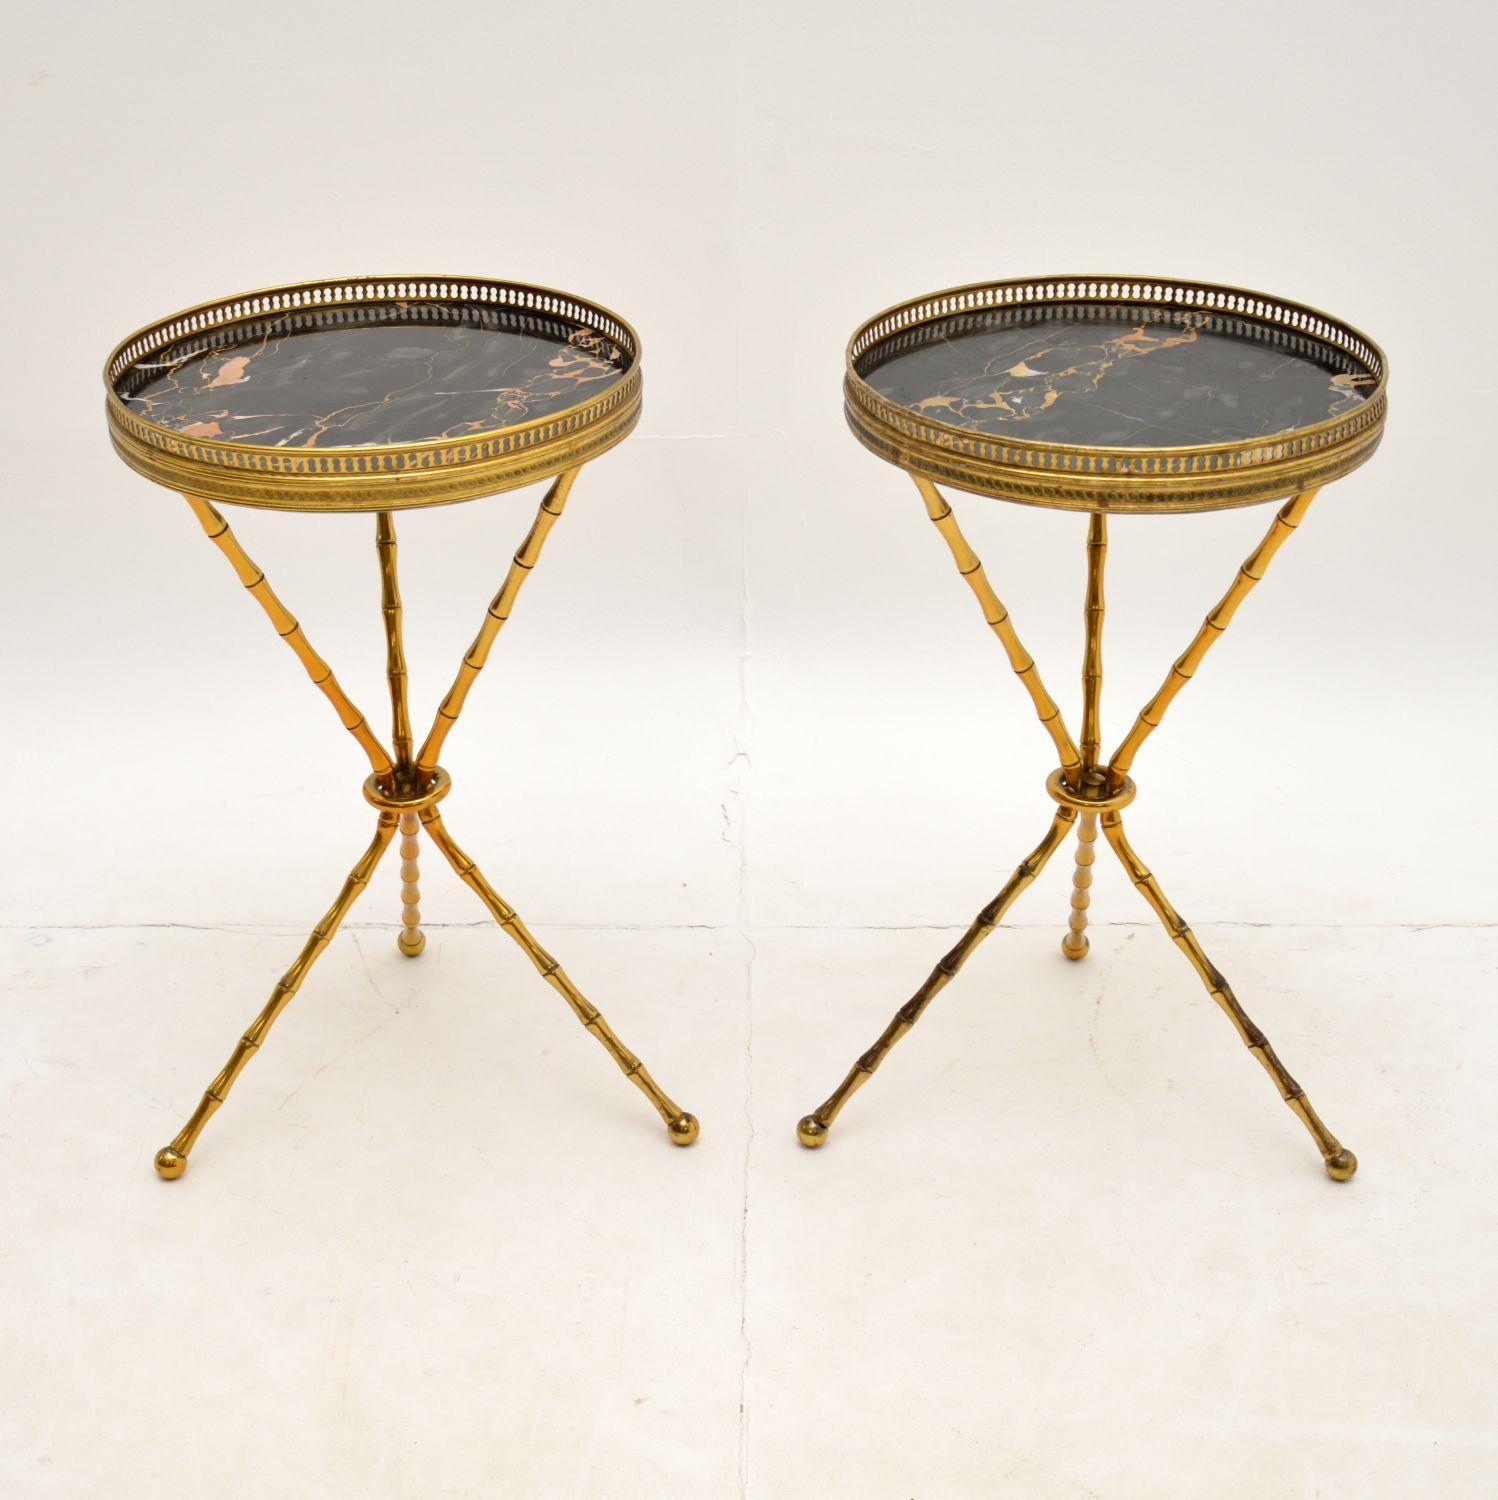 A stunning pair of vintage solid brass and marble side tables. Made in France, these date from around the 1950-60’s.

They are of superb quality, the brass tripod frames are designed as faux bamboo. They have pierced galleries around the top, and